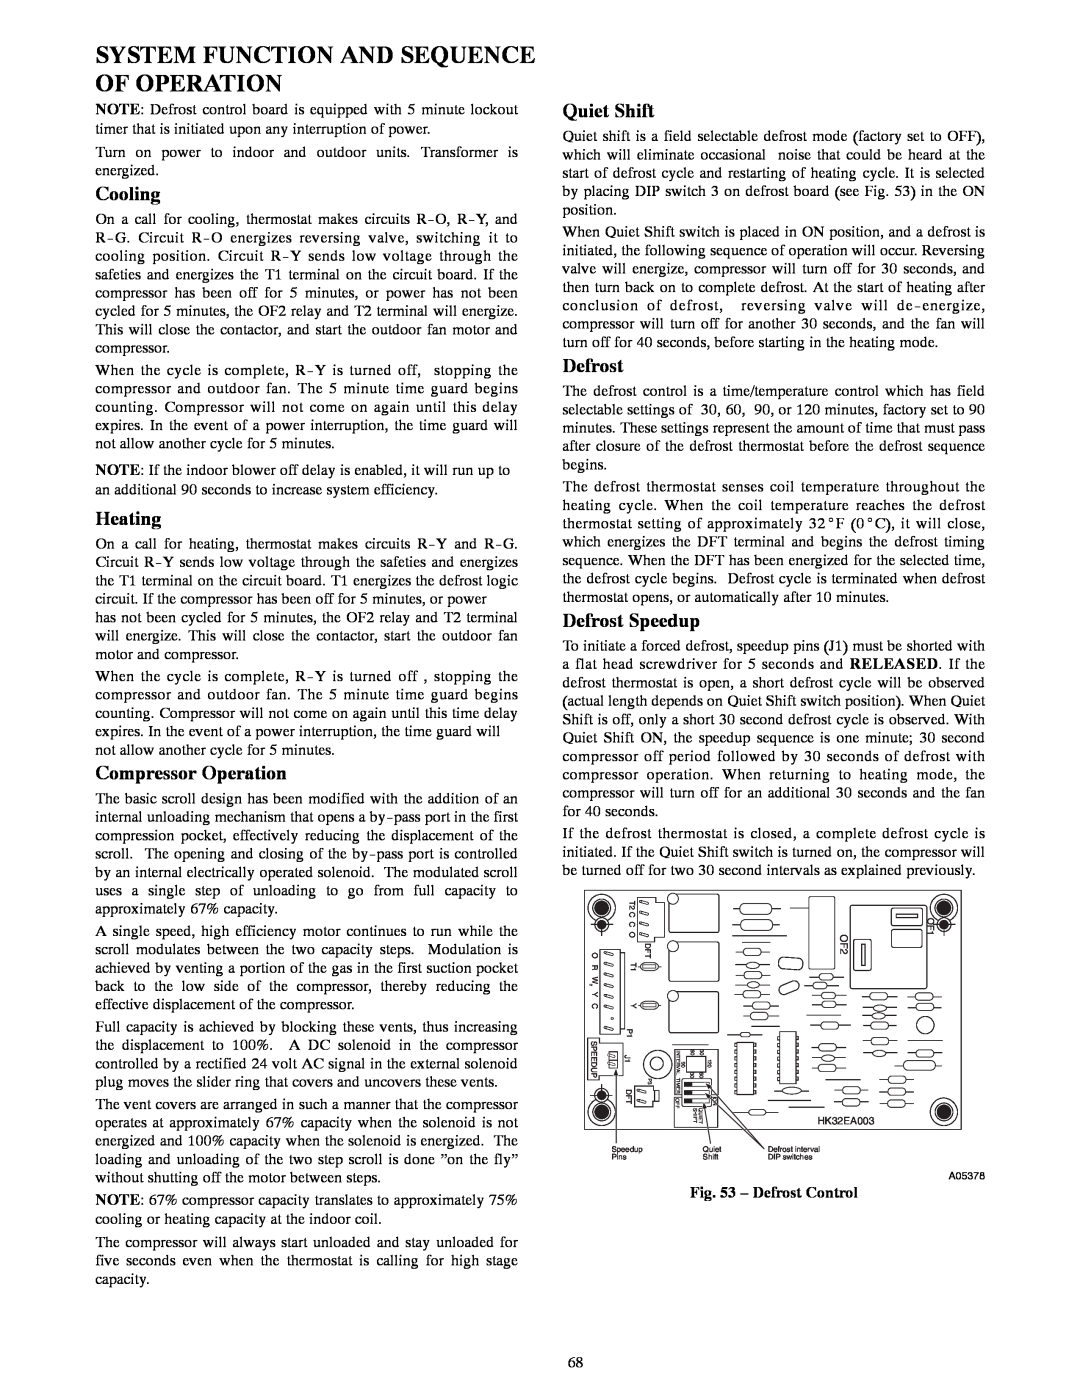 Bryant R-22 System Function And Sequence Of Operation, Compressor Operation, Defrost Speedup, Cooling, Heating 